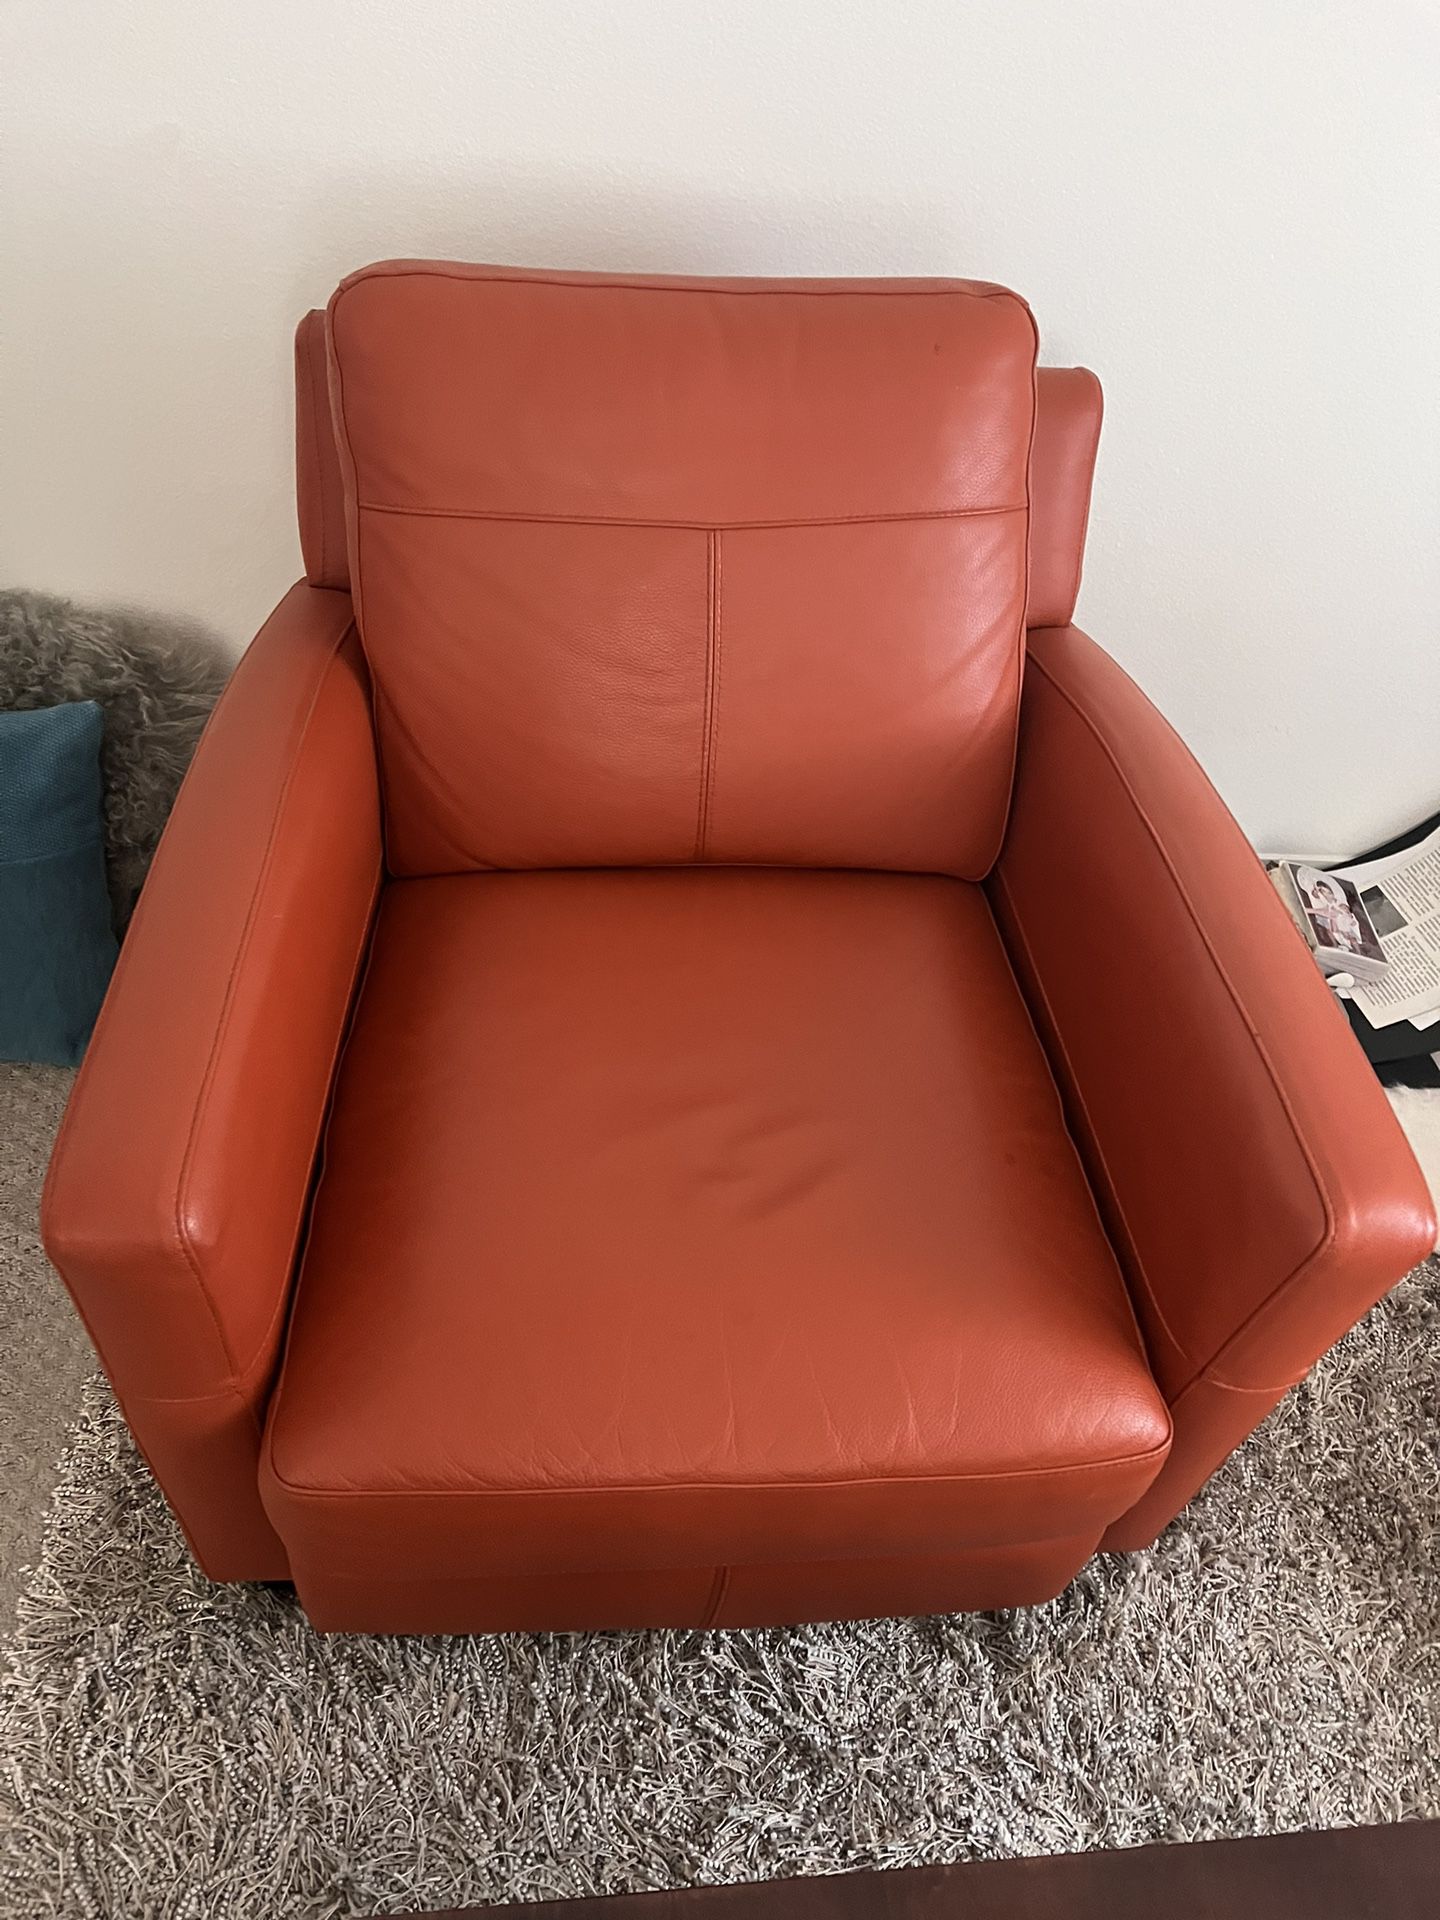 Small Italian Leather Sofa with Option to Purchase Larger Size